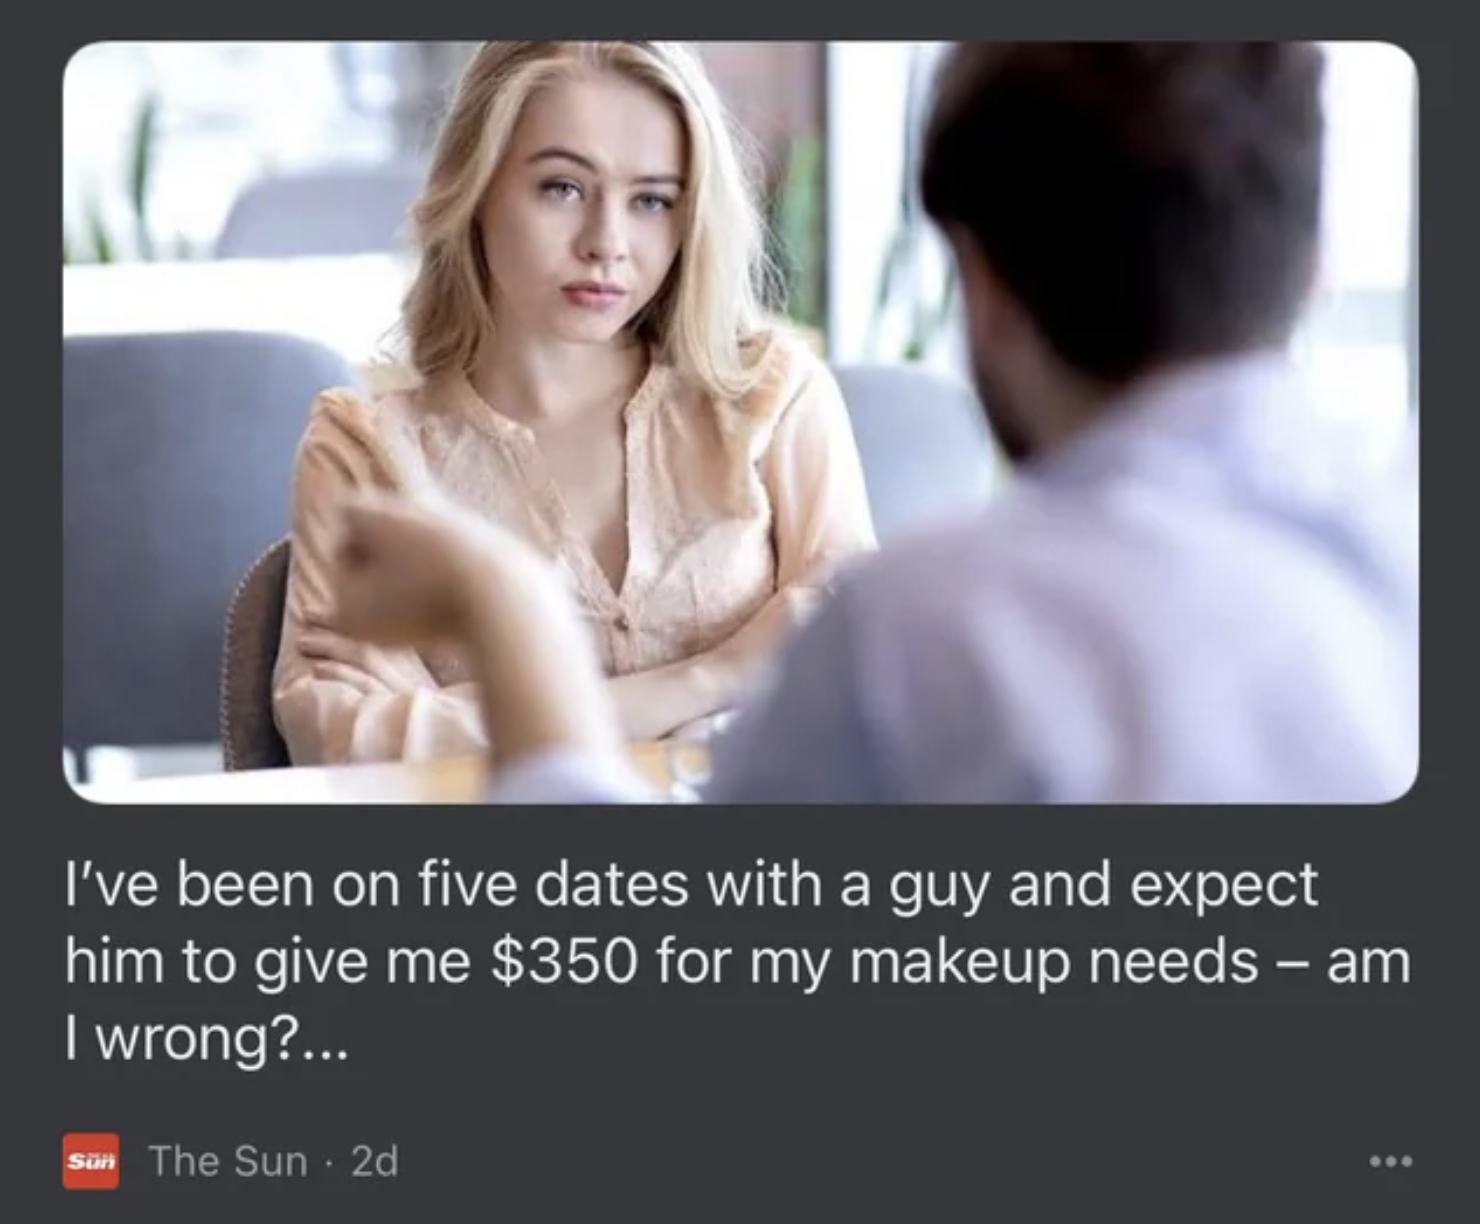 Trashy Pics - Dating - I've been on five dates with a guy and expect him to give me $350 for my makeup needs am I wrong?... Son The Sun. 2d www